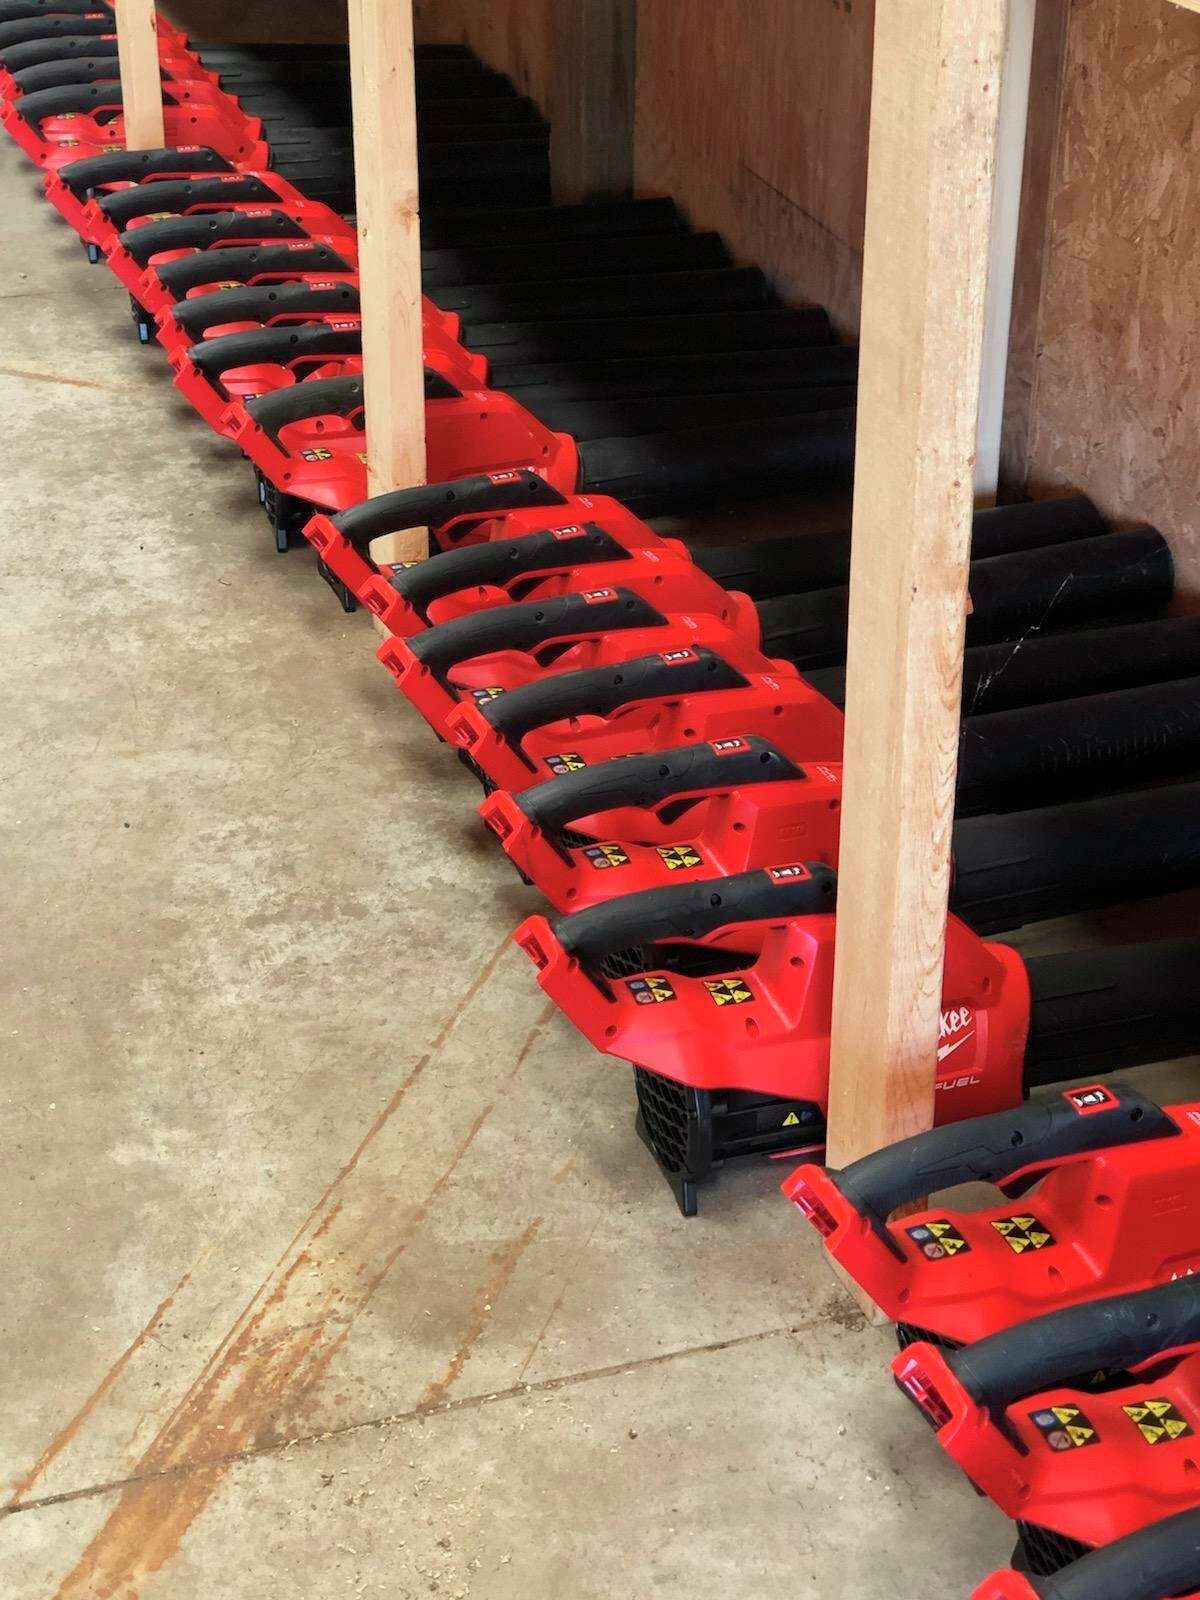 Greater Michigan Construction Academy (GMCA) received five pallets of new tools donated by Milwaukee Tools. (Photo provided)